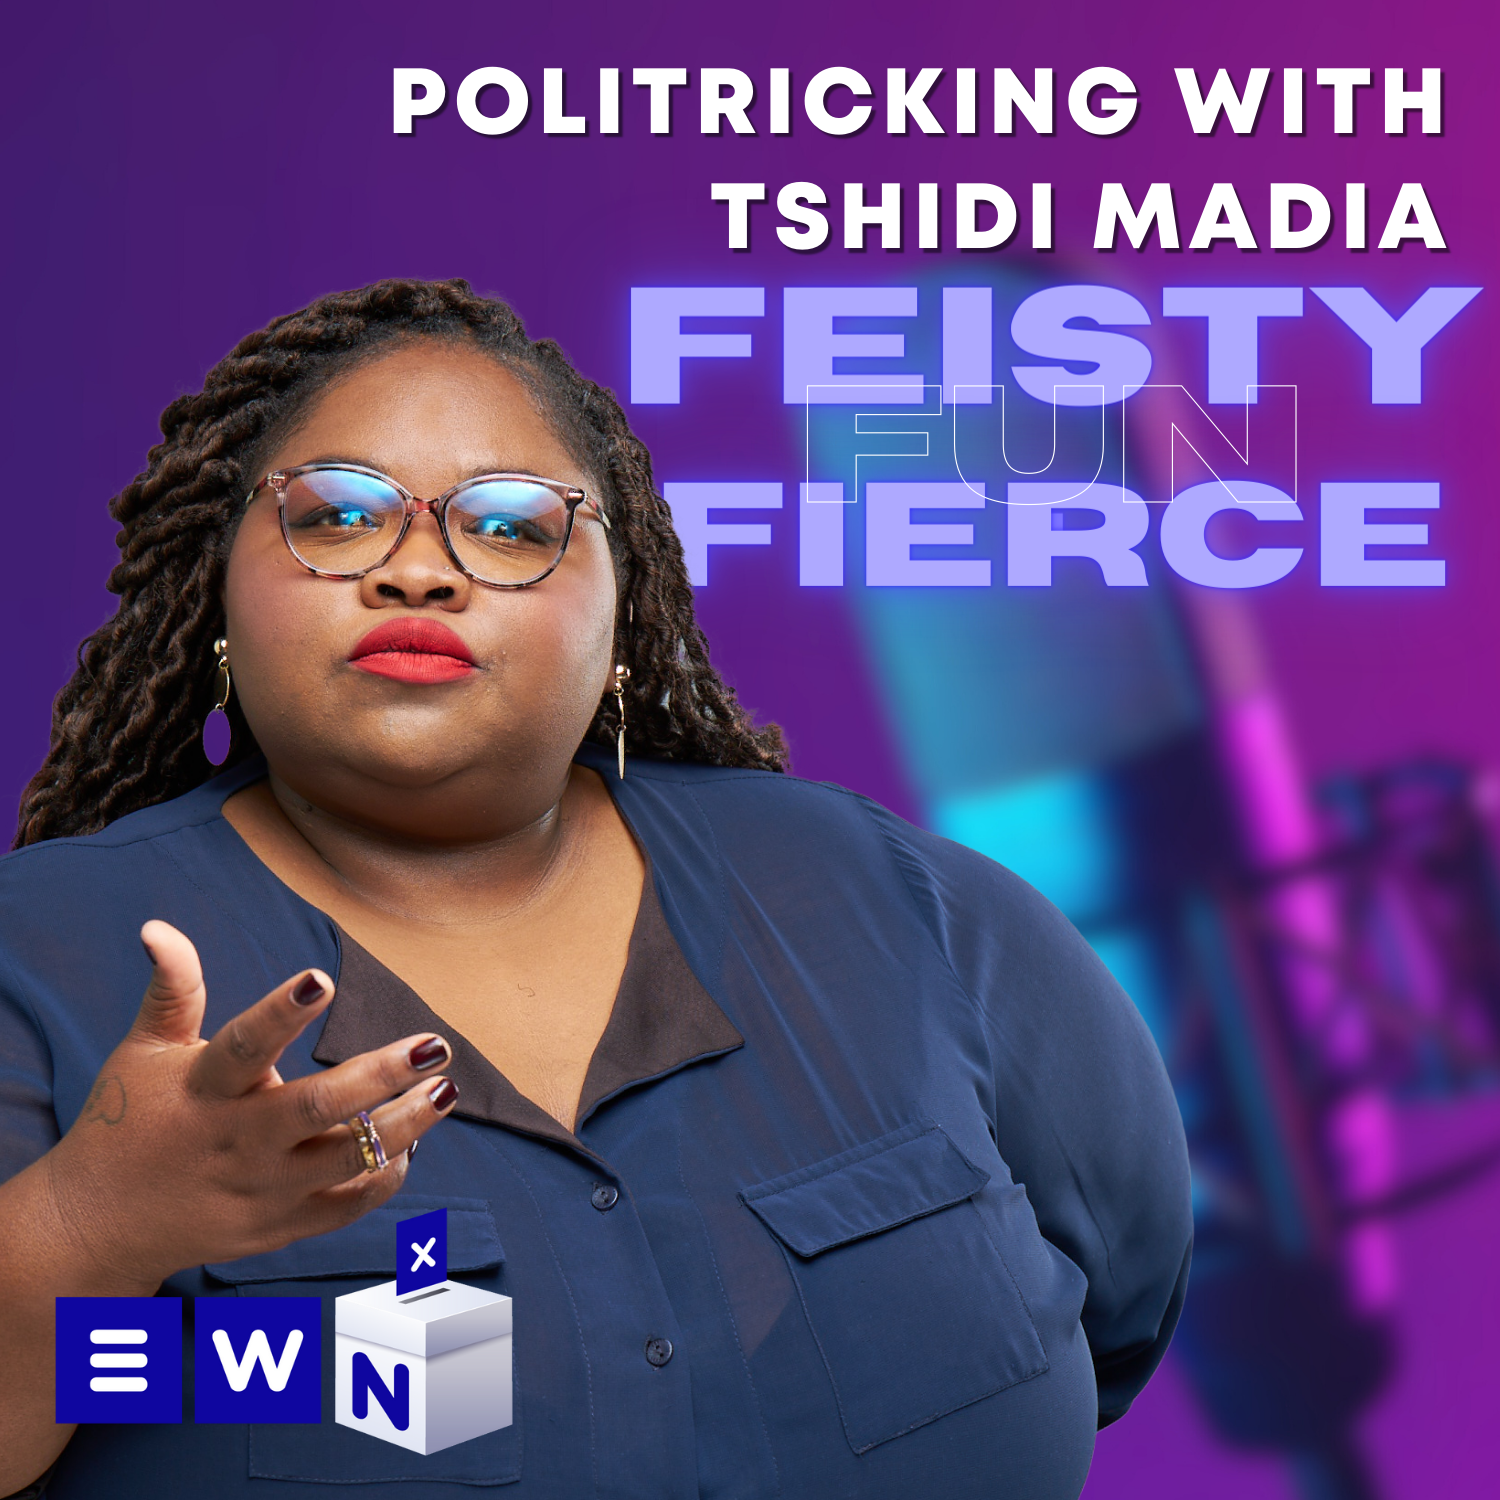 Politricking with Tshidi Madia: The Official Opposition, Democratic Alliance Chief Whip, Siviwe Gwarube